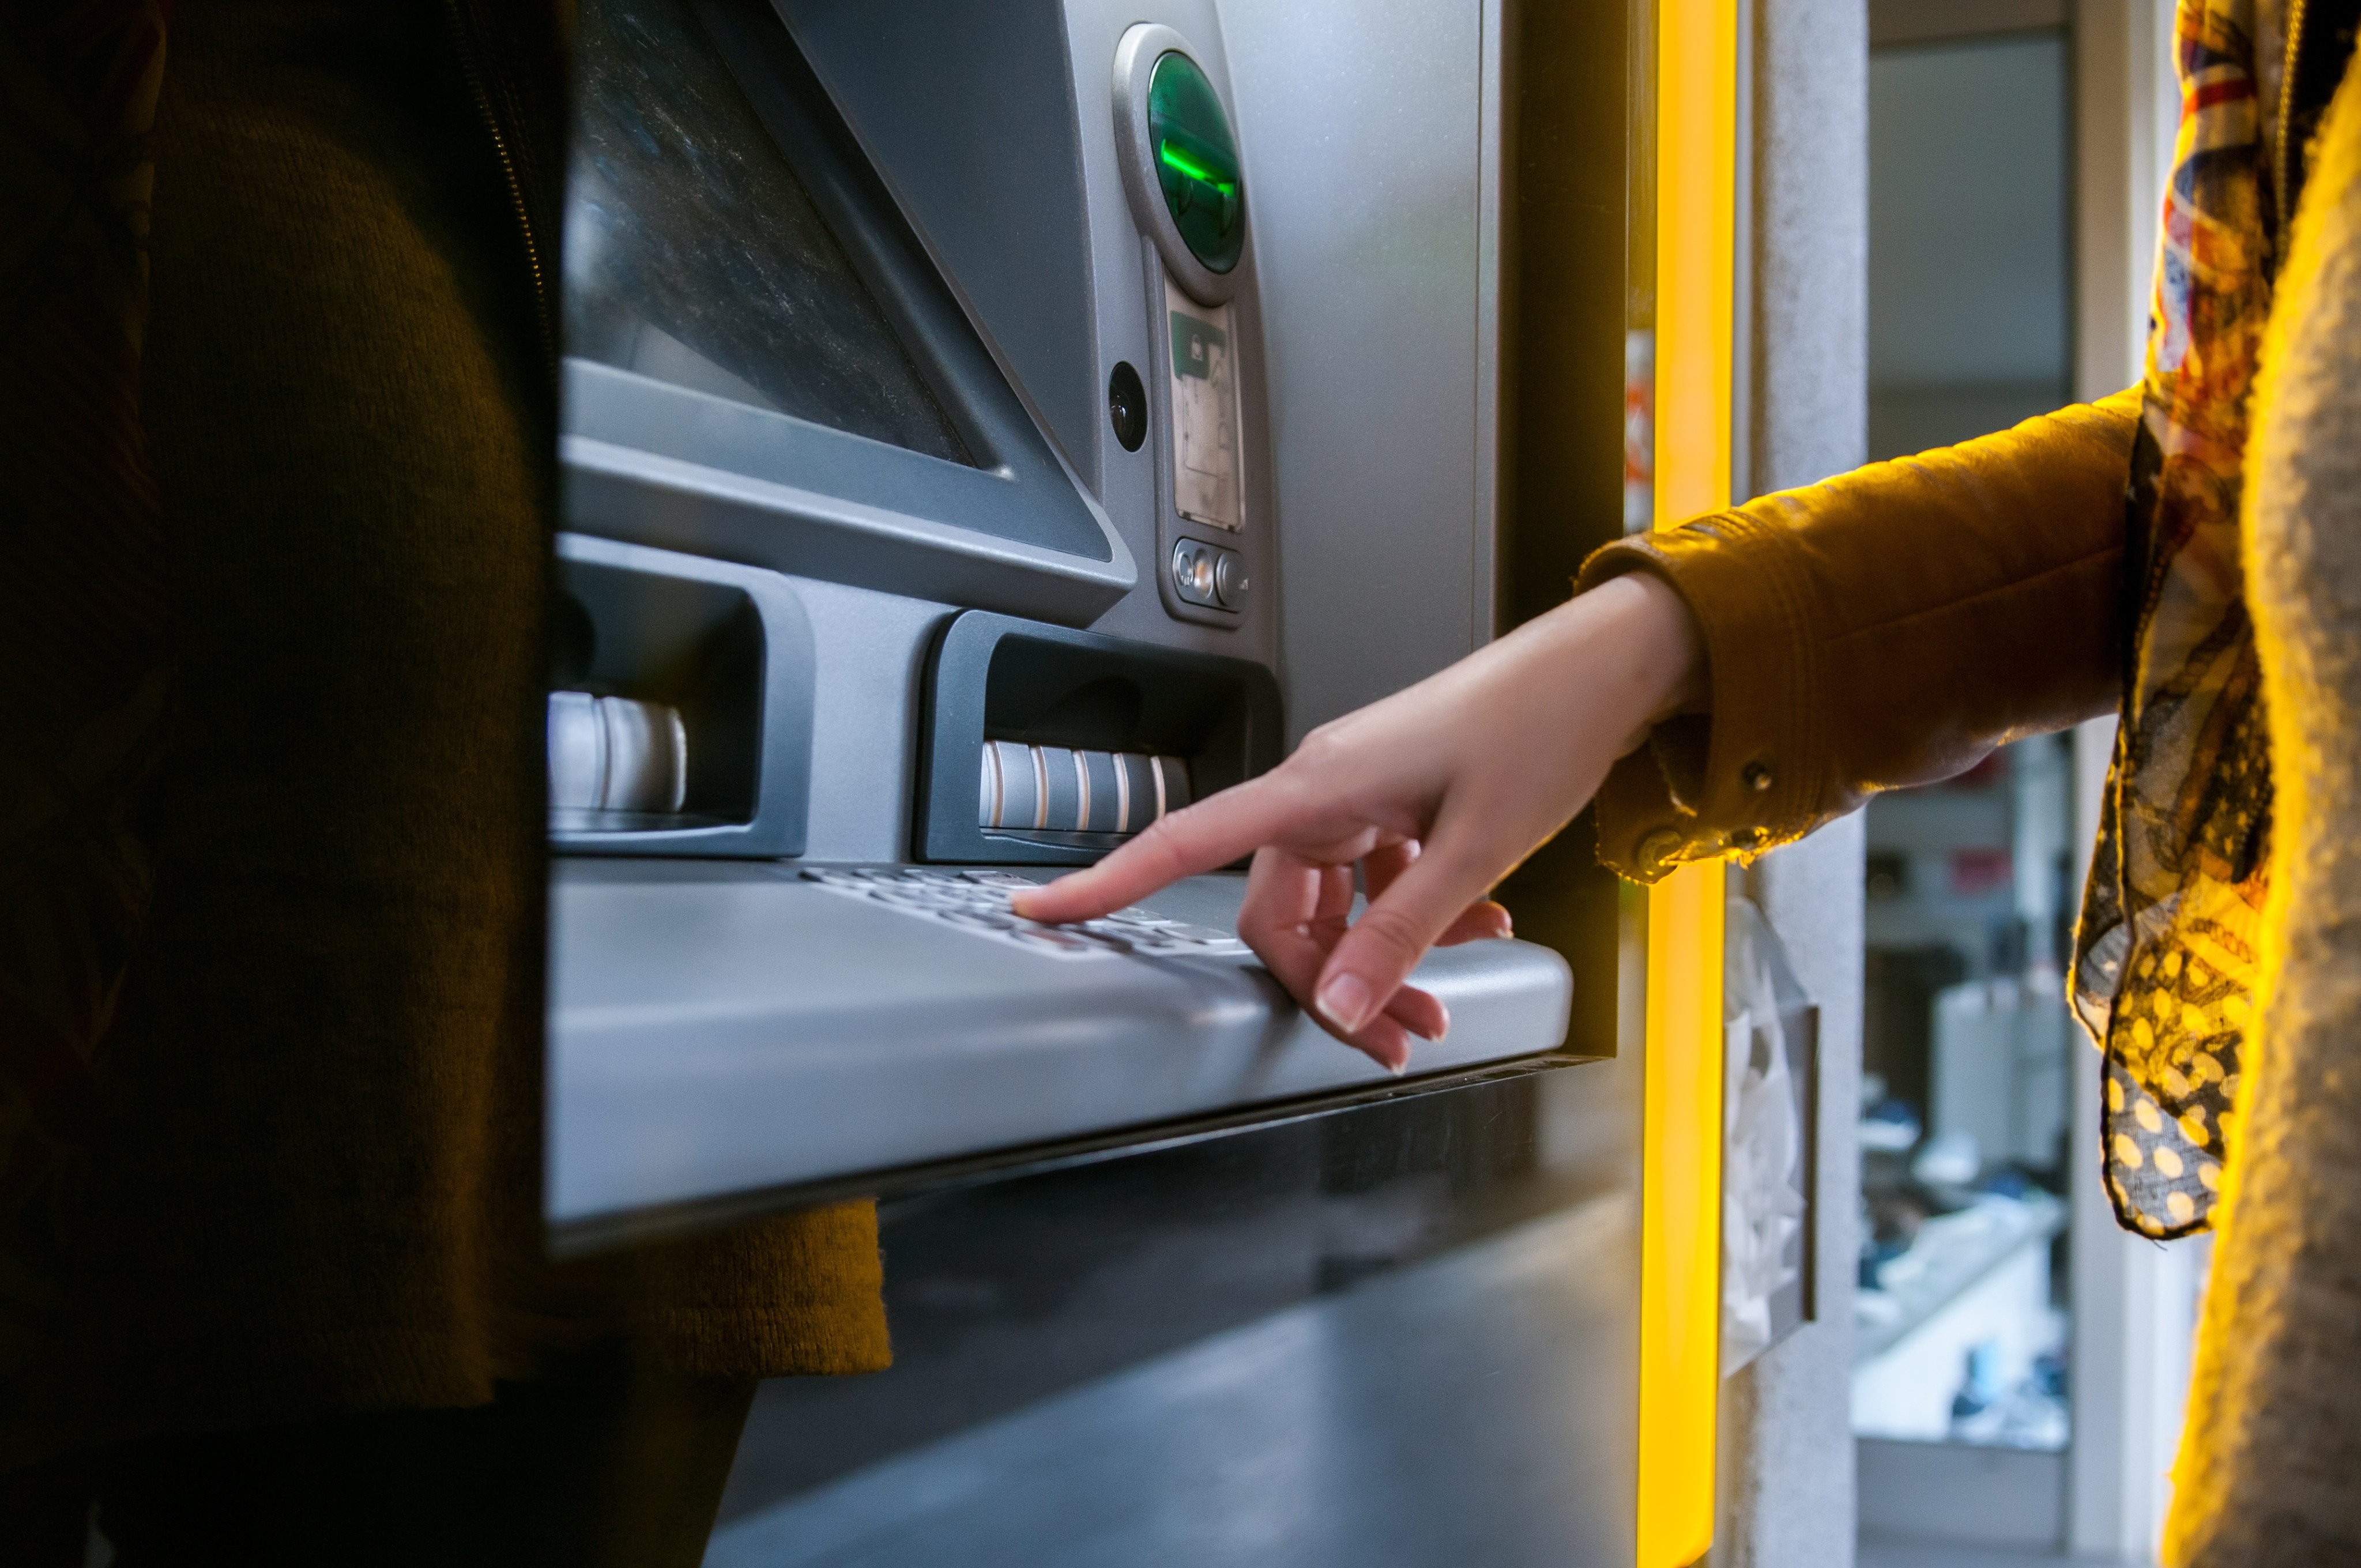 Police have arrested two men after they try to deposit bounced cheques through an ATM as part of a HK$1.5 million scam. Photo: Shutterstock